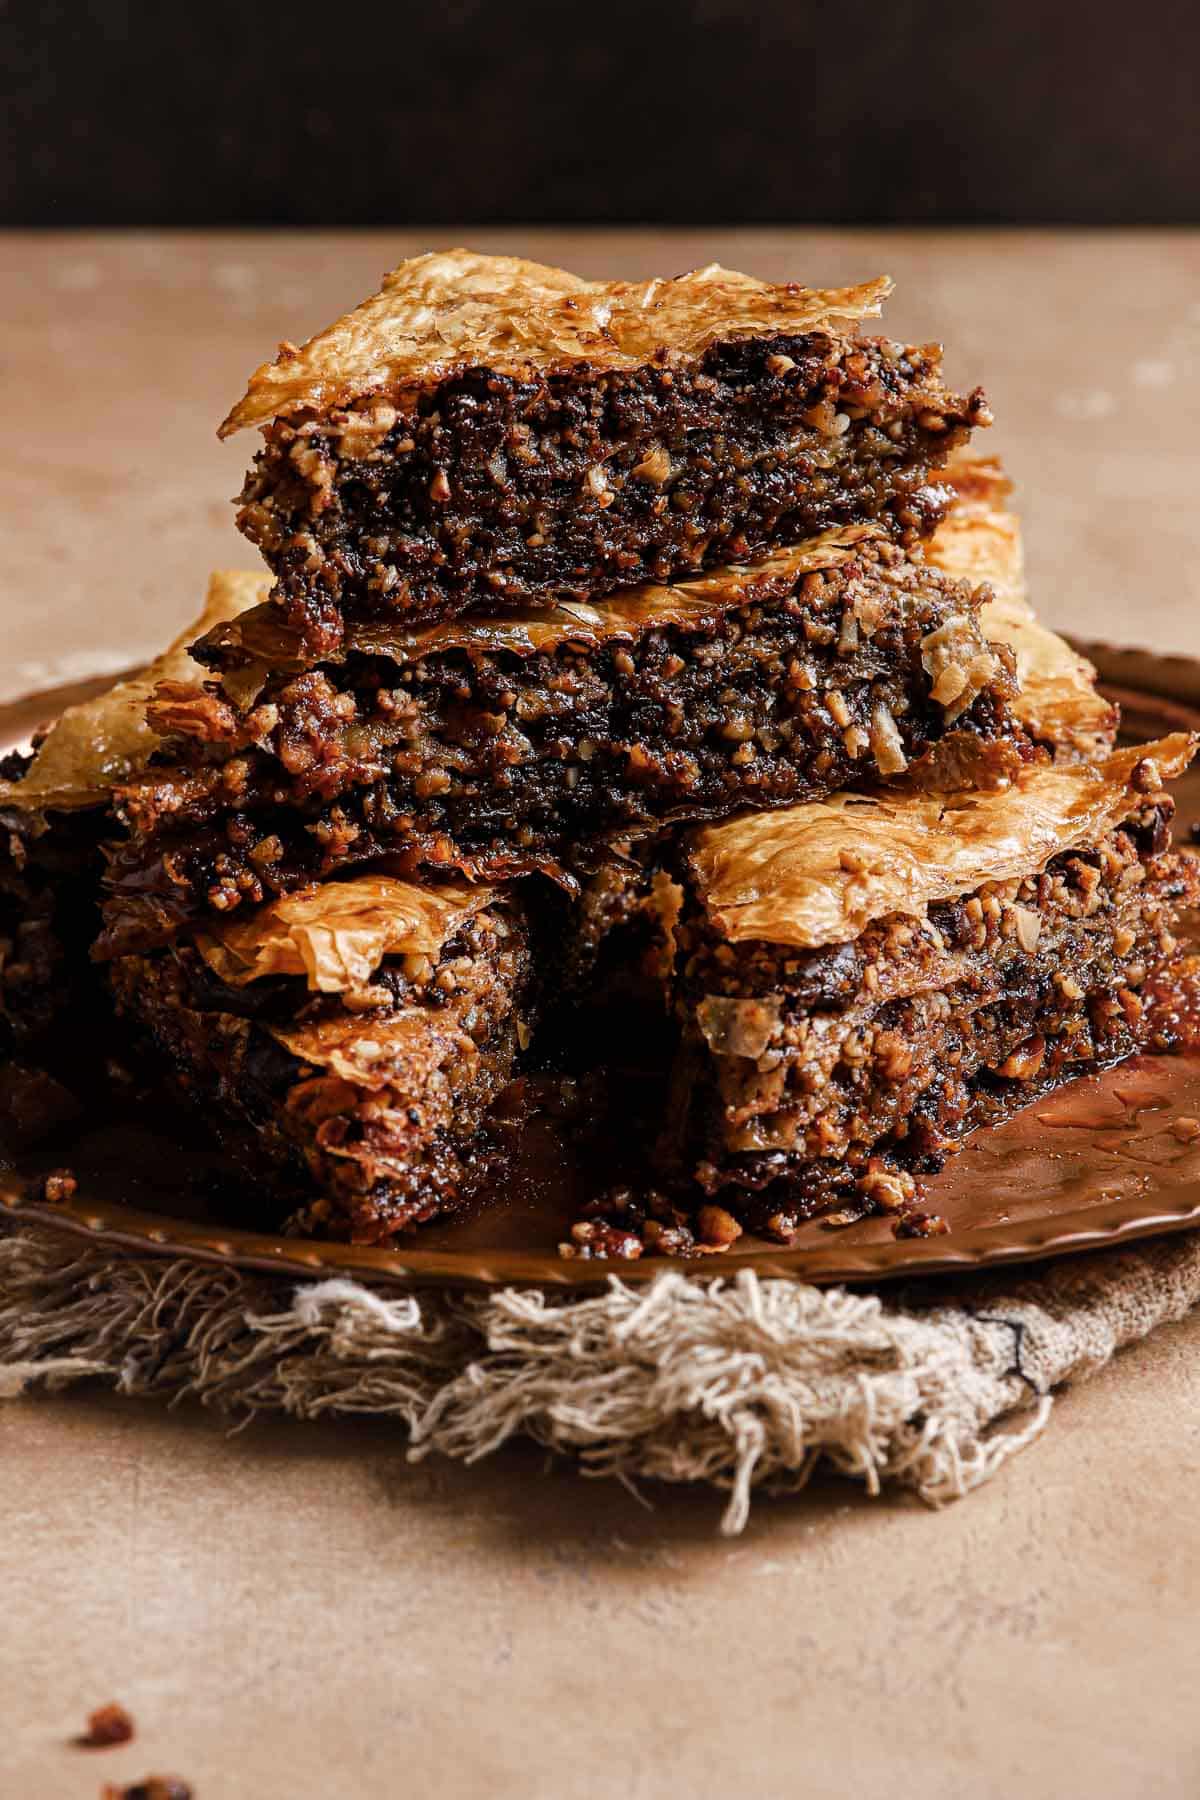 Triangular pieces of homemade chocolate baklava are stacked on a dish. The filo layers look golden brown and crispy while the chocolate baklava filling is deeply chocolatey and nutty. 